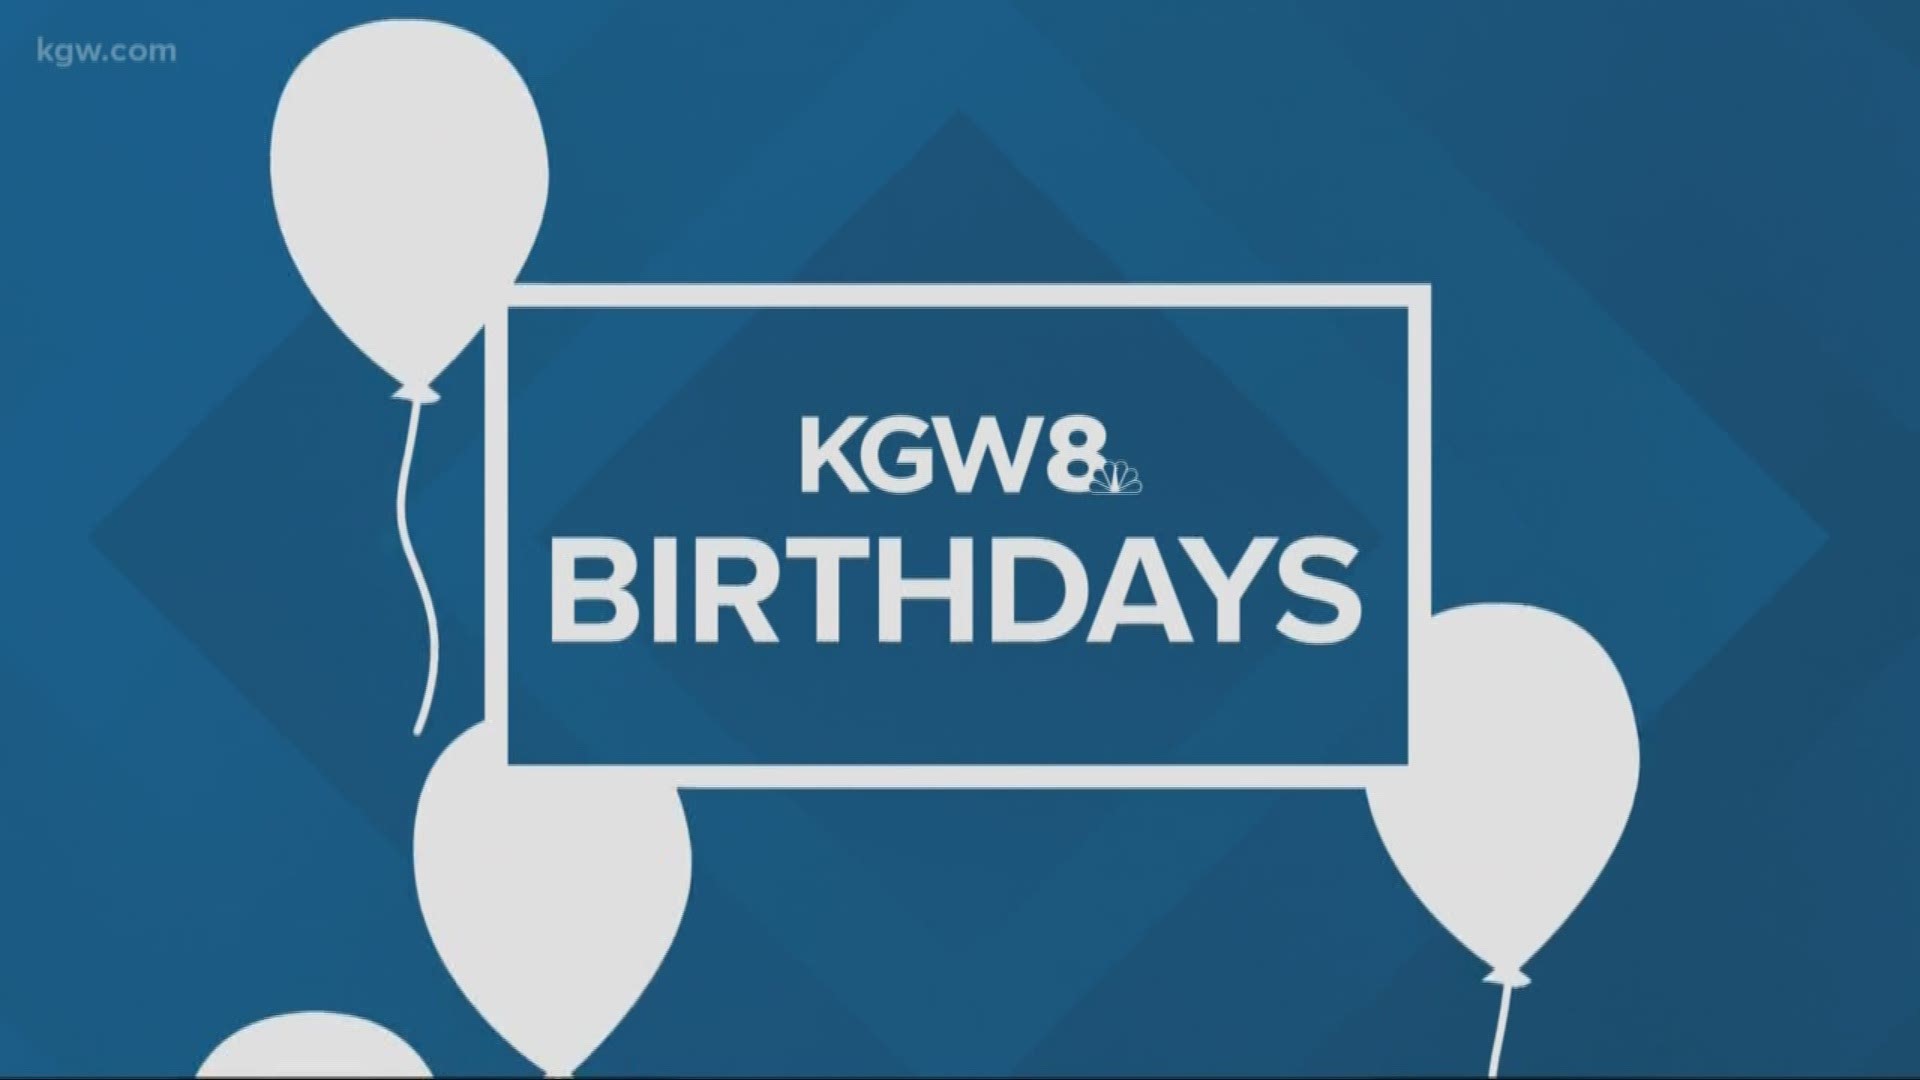 Happy birthday to all the KGW viewers born on October 30, 2019! We hope it's a happy and wonderful day!